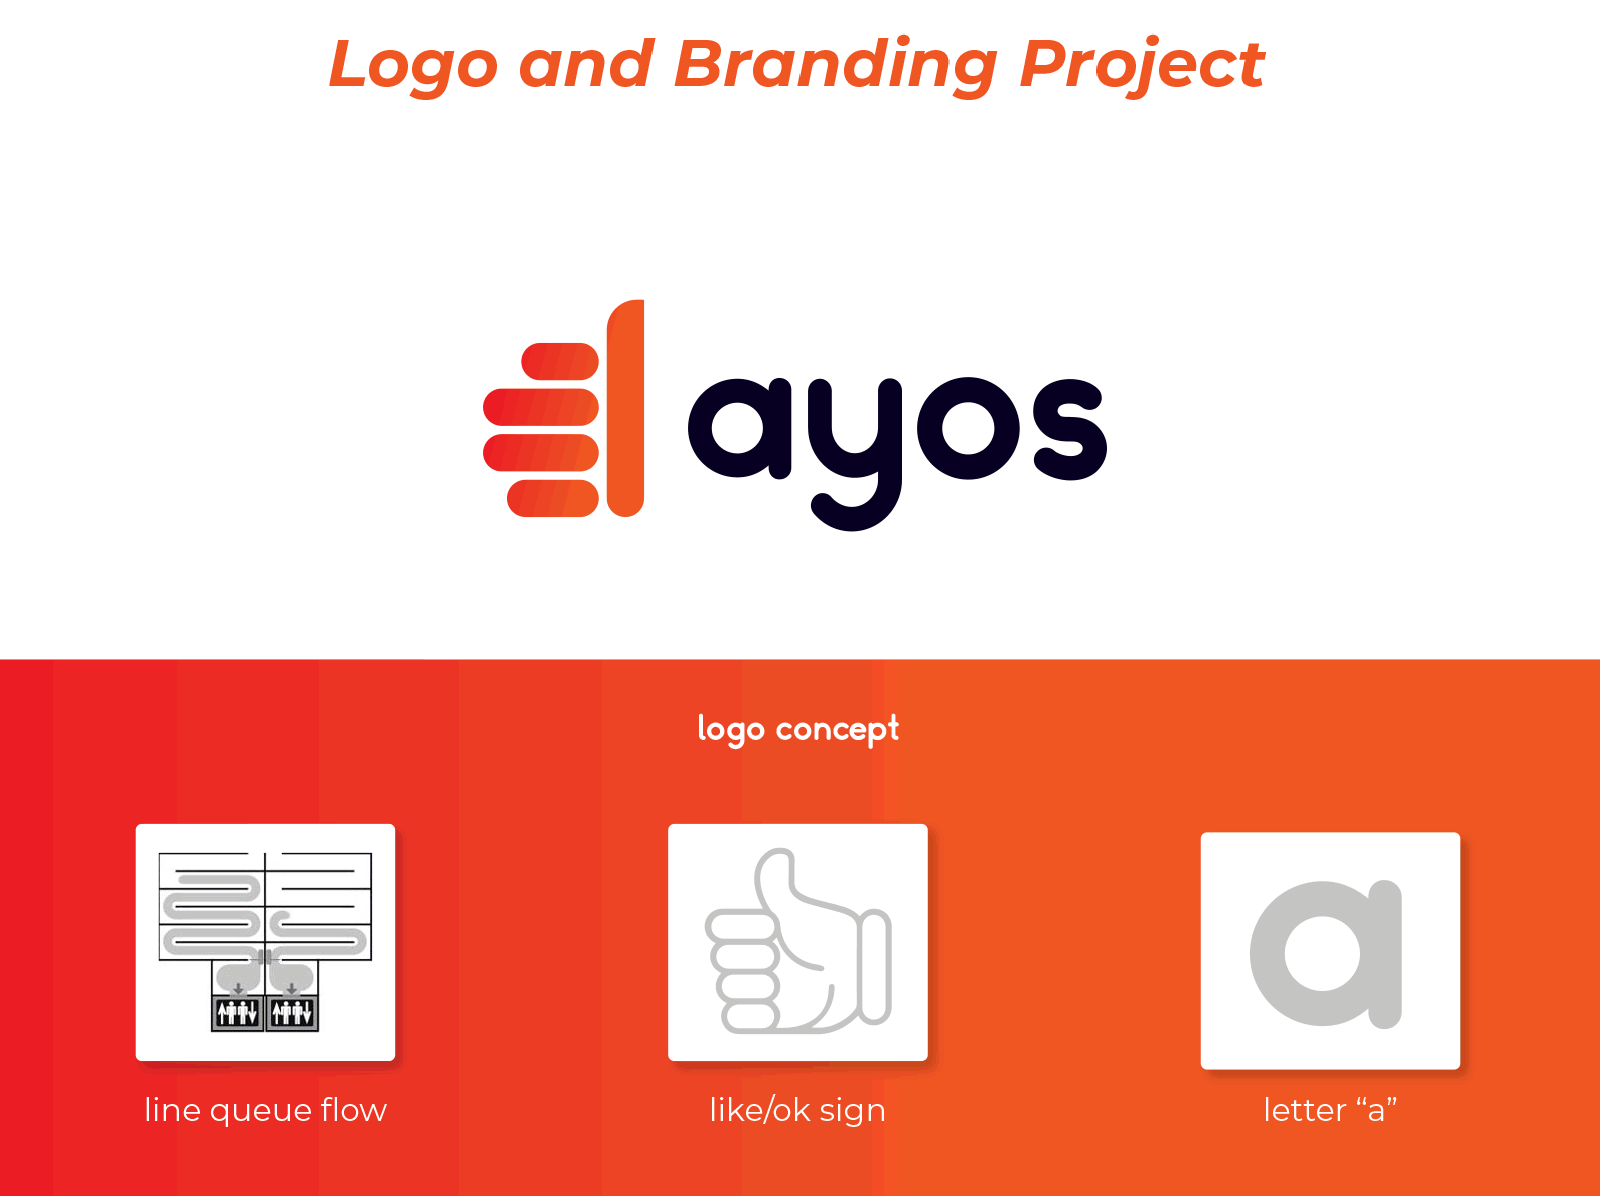 My Latest Logo and Branding Project